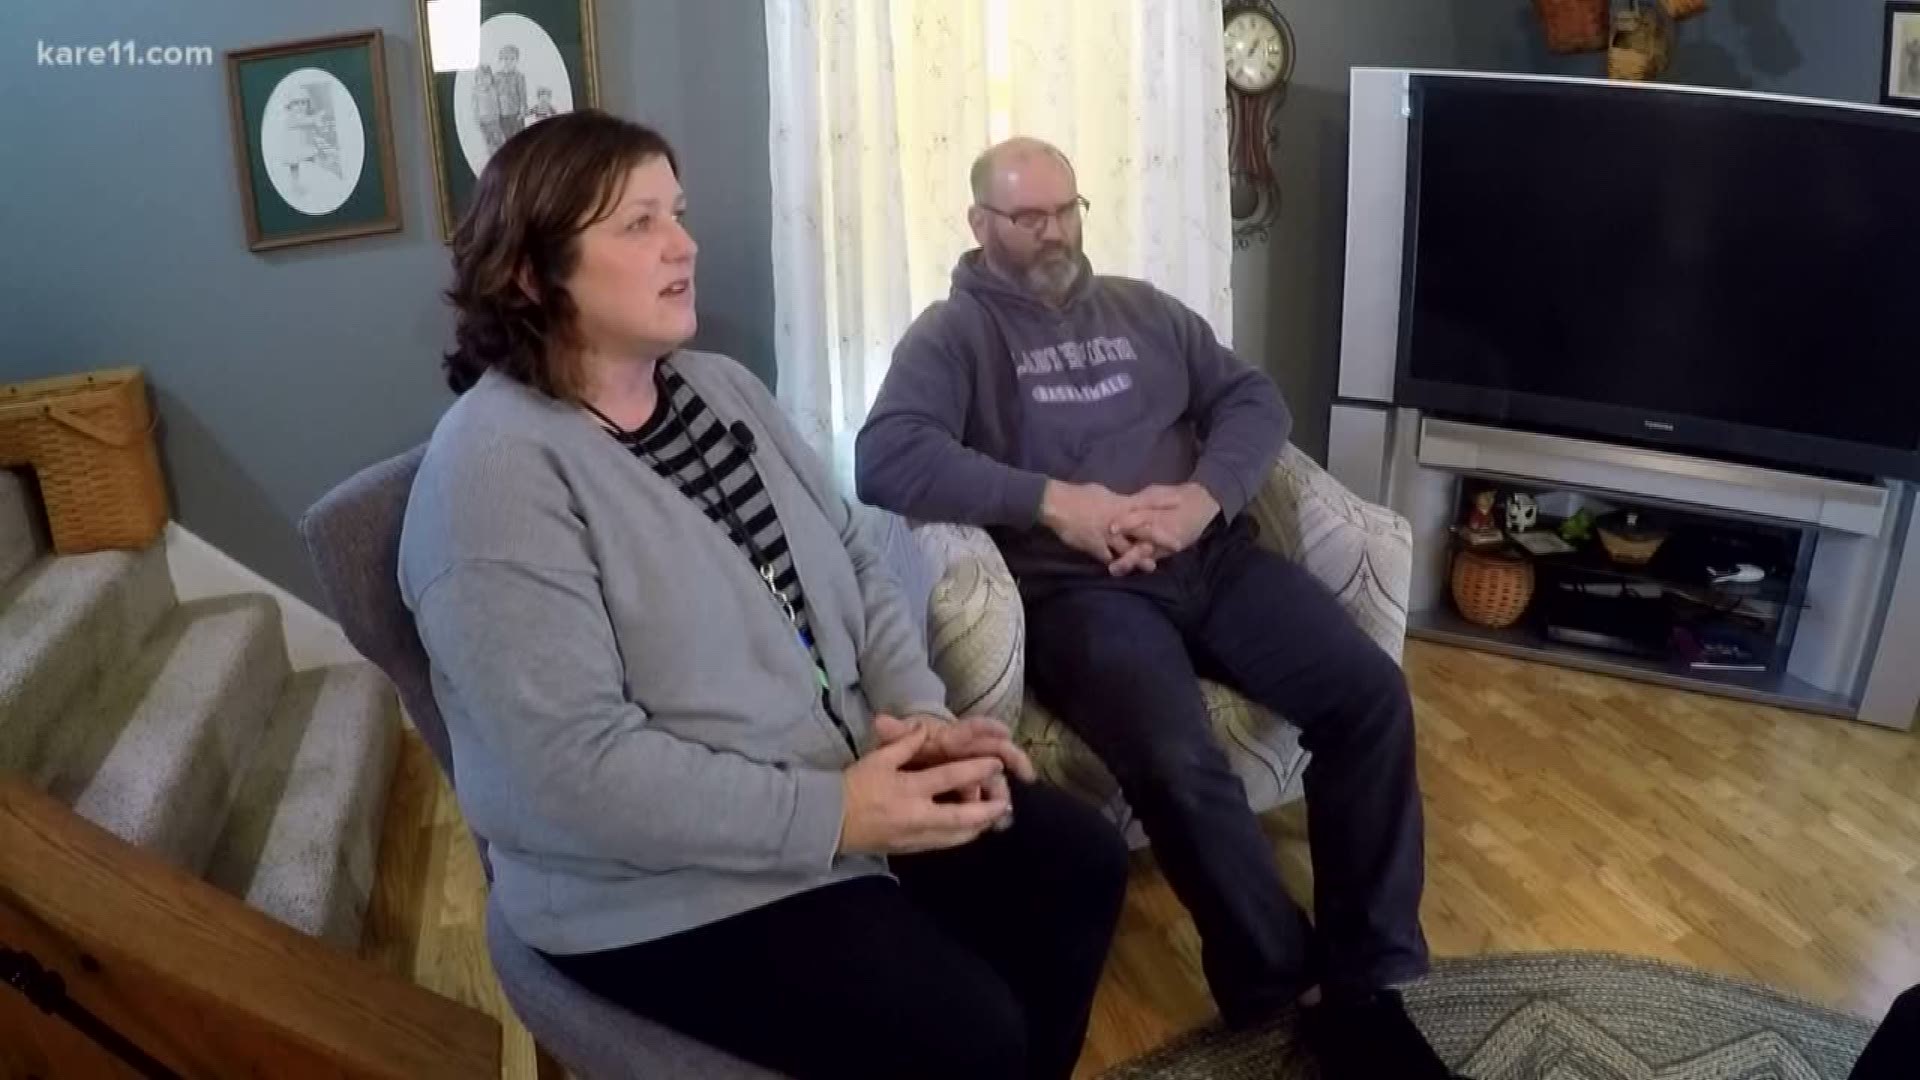 Family members of missing teen Jayme Closs are giving their first interviews since their brother and sister-in-law were murdered and niece kidnapped one month ago. https://kare11.tv/2z3UaWI